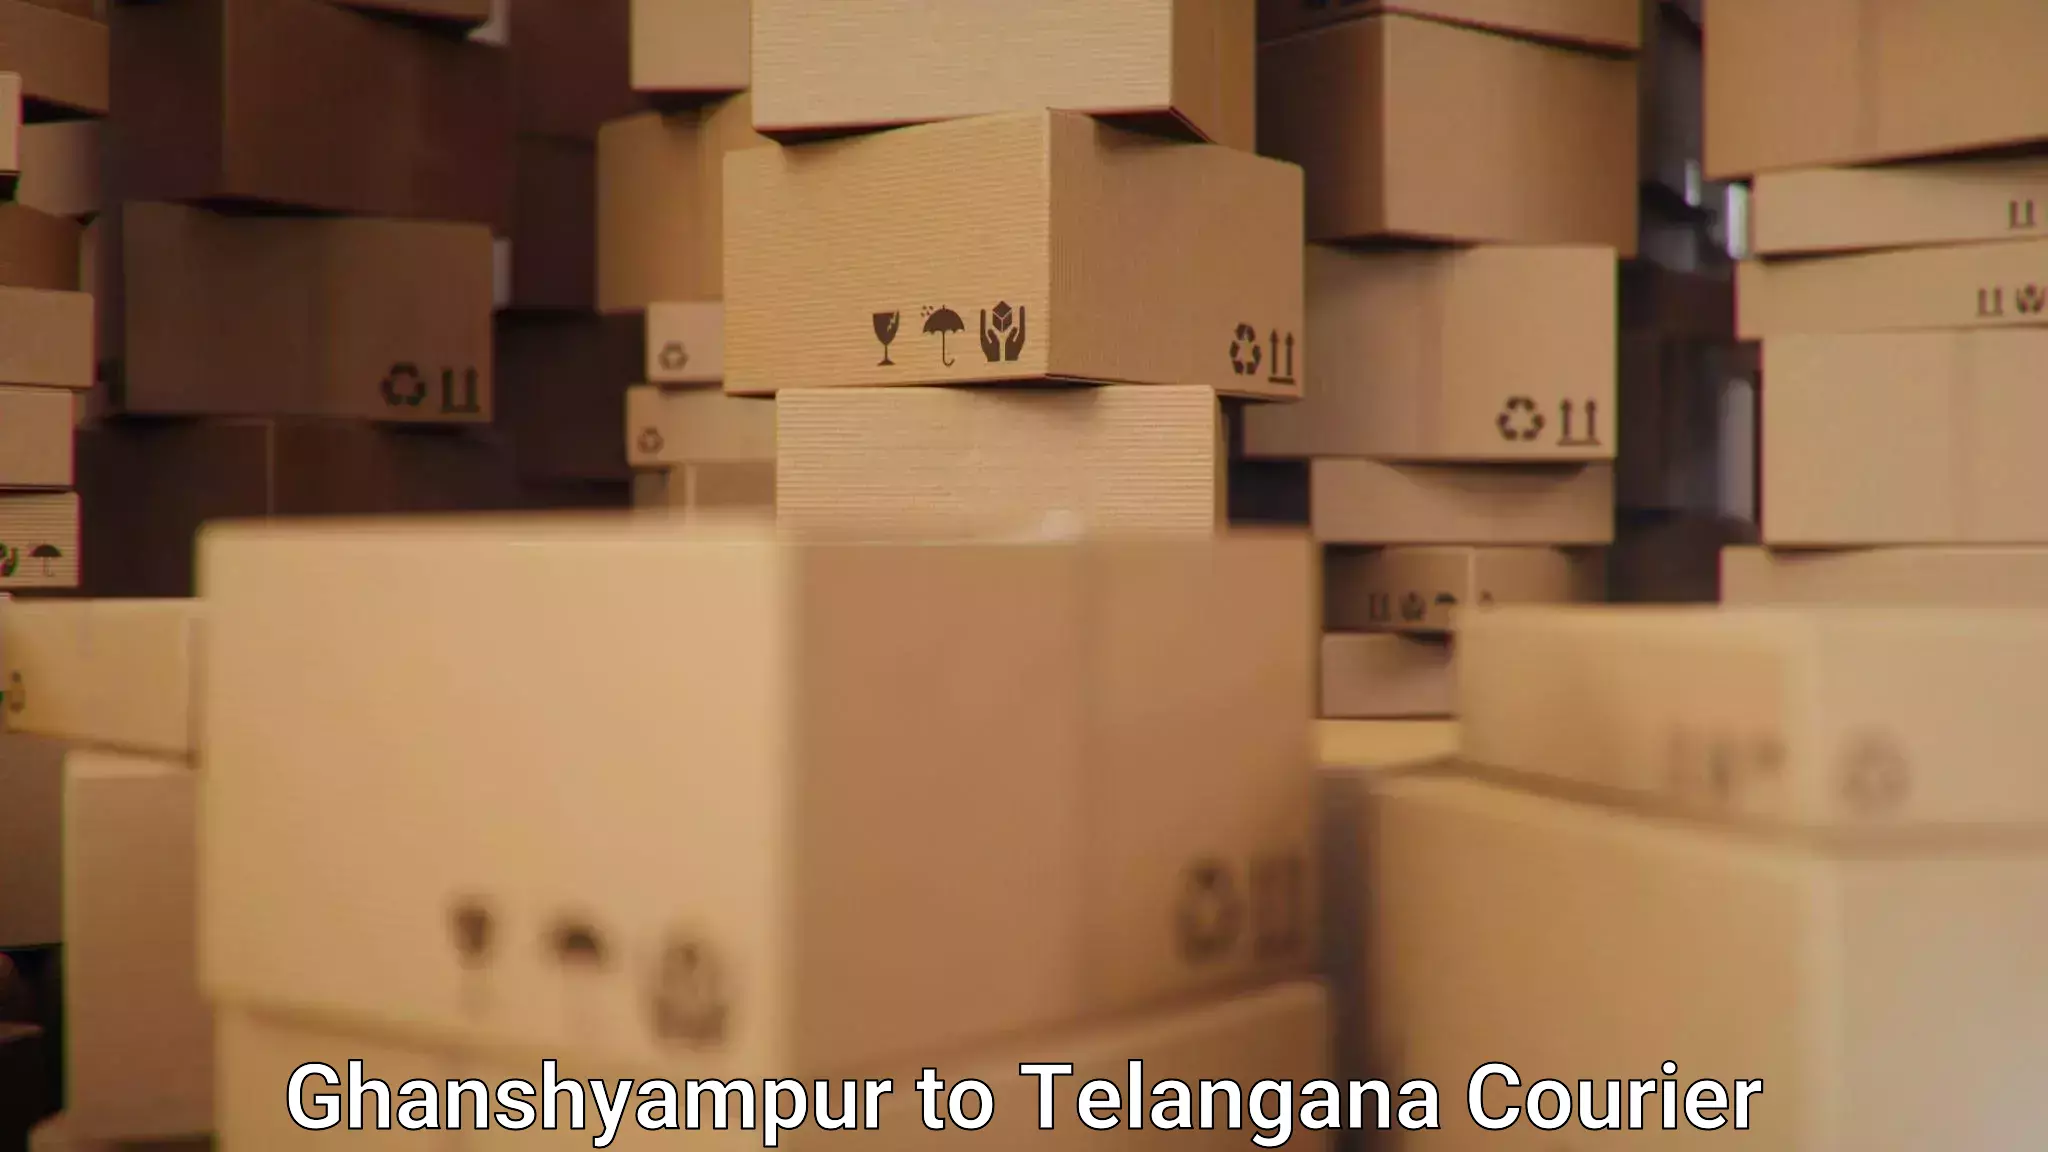 International courier networks Ghanshyampur to Telangana